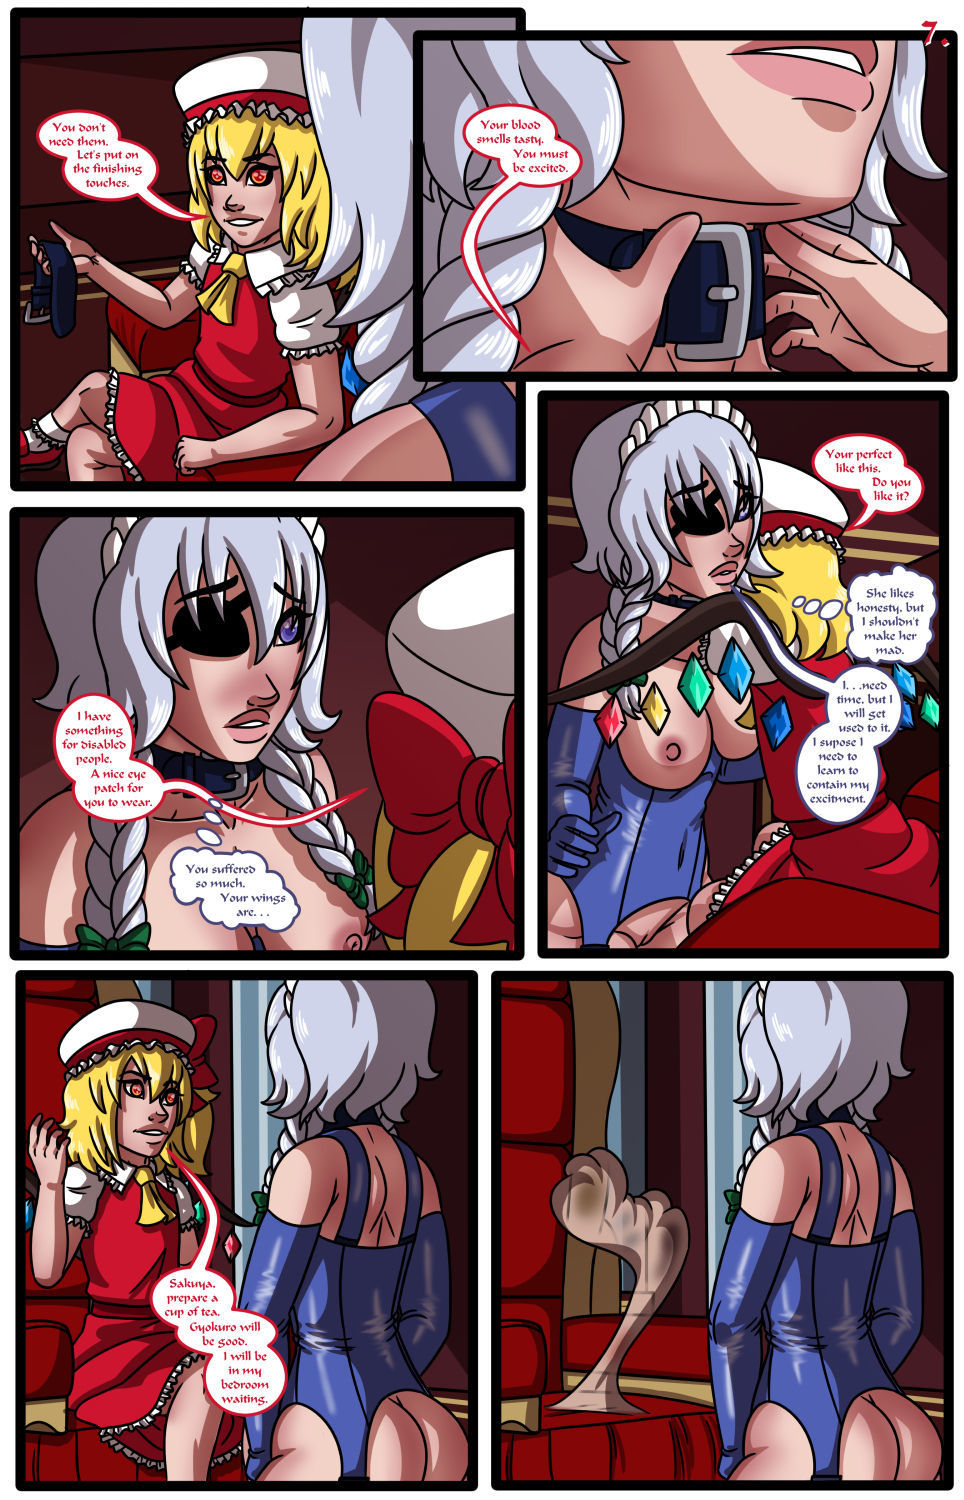 Overthrone - JZerosk page 7